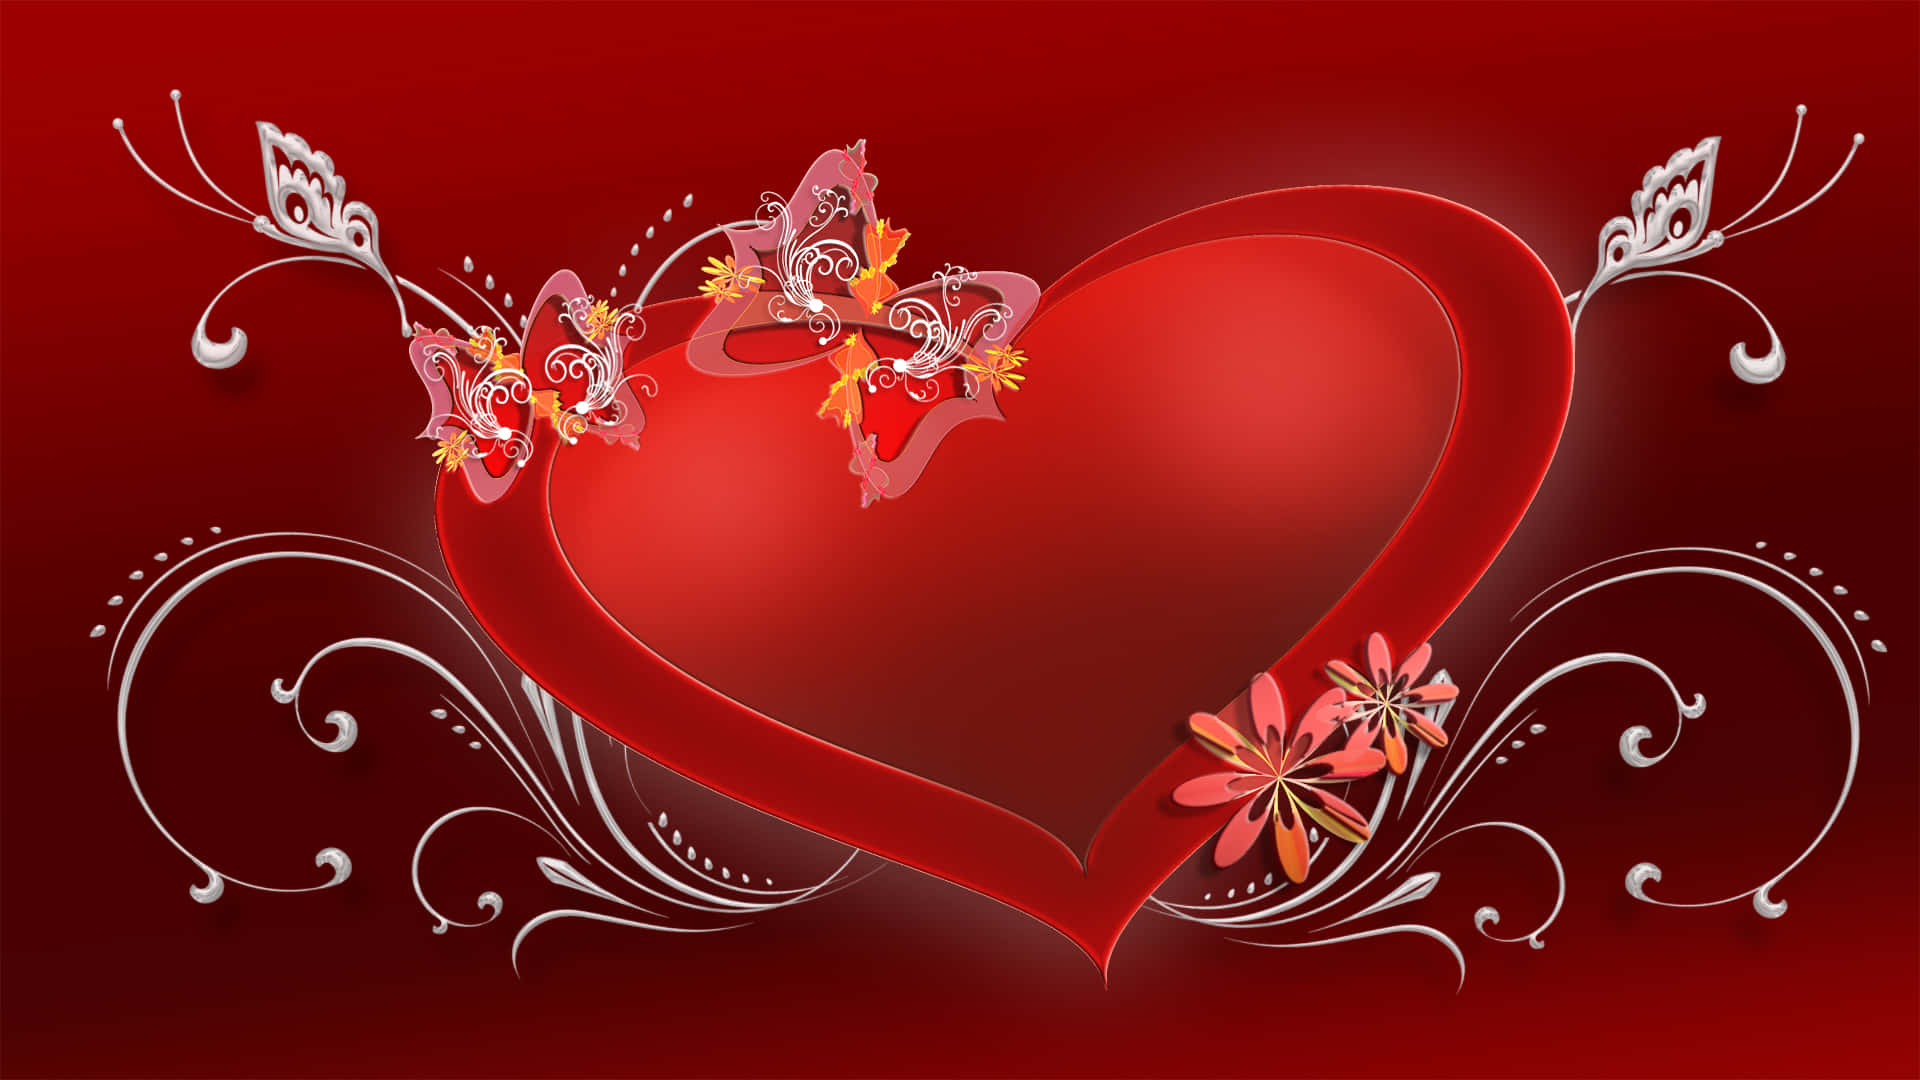 Show Your Love With a Beautiful High-Resolution Valentines Day Background